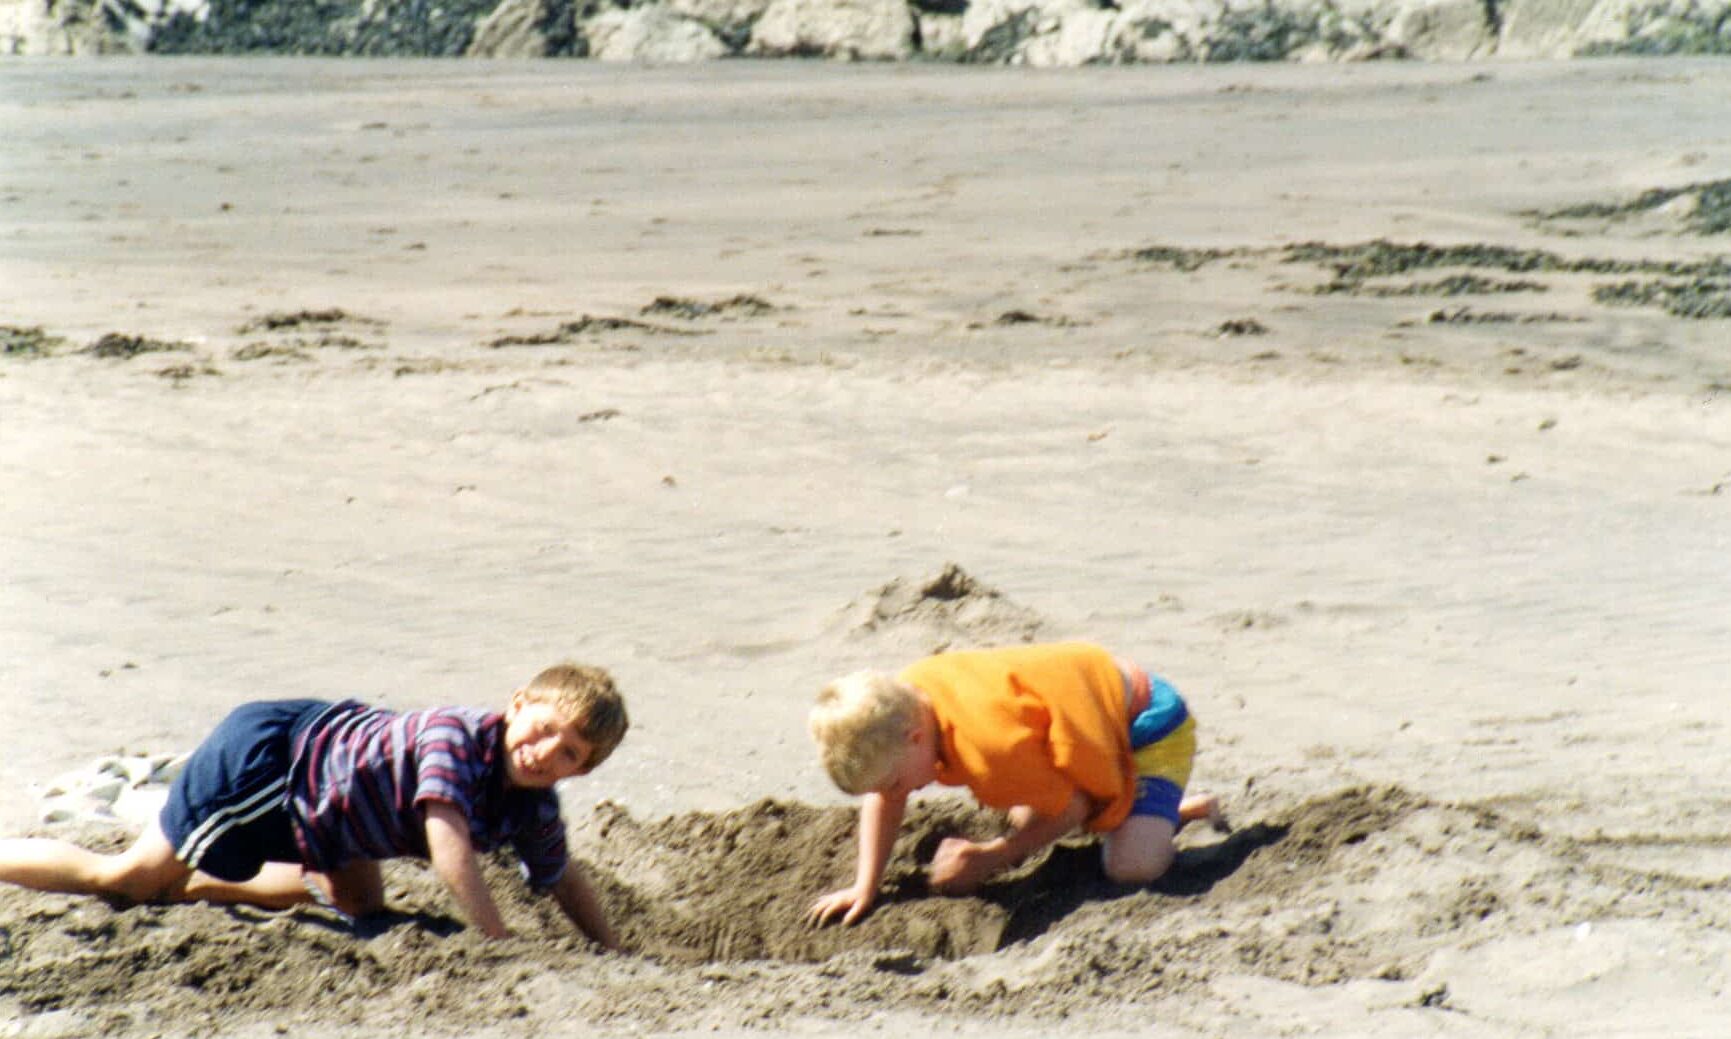 Me and my cousin playing on the beach in Somerset.